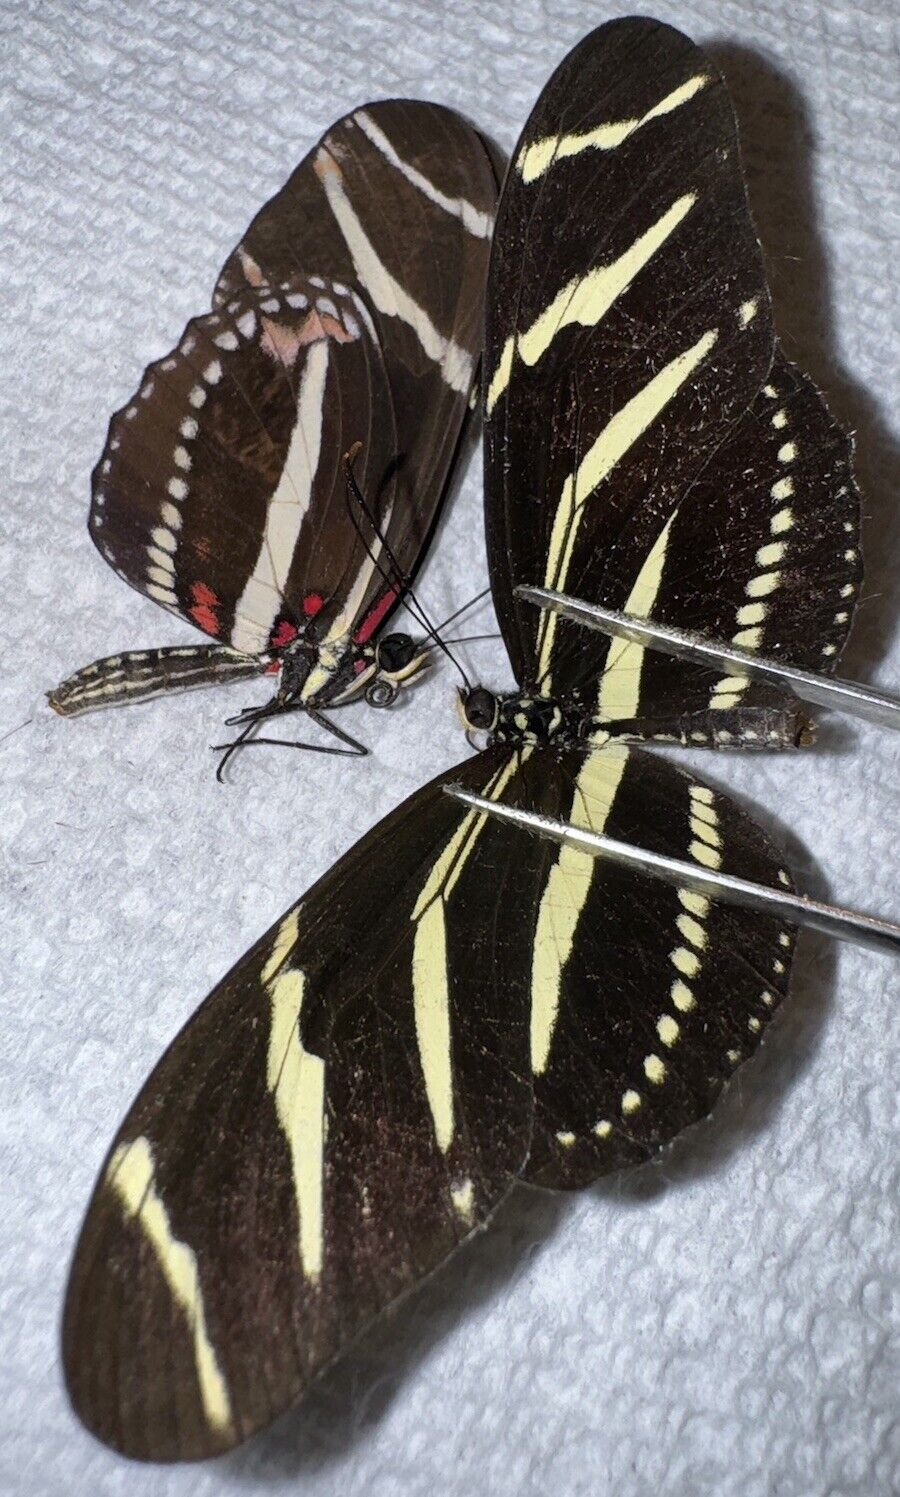 ZEBRA BUTTERFLY PAIR (M,F) #3 Heliconius charitonia